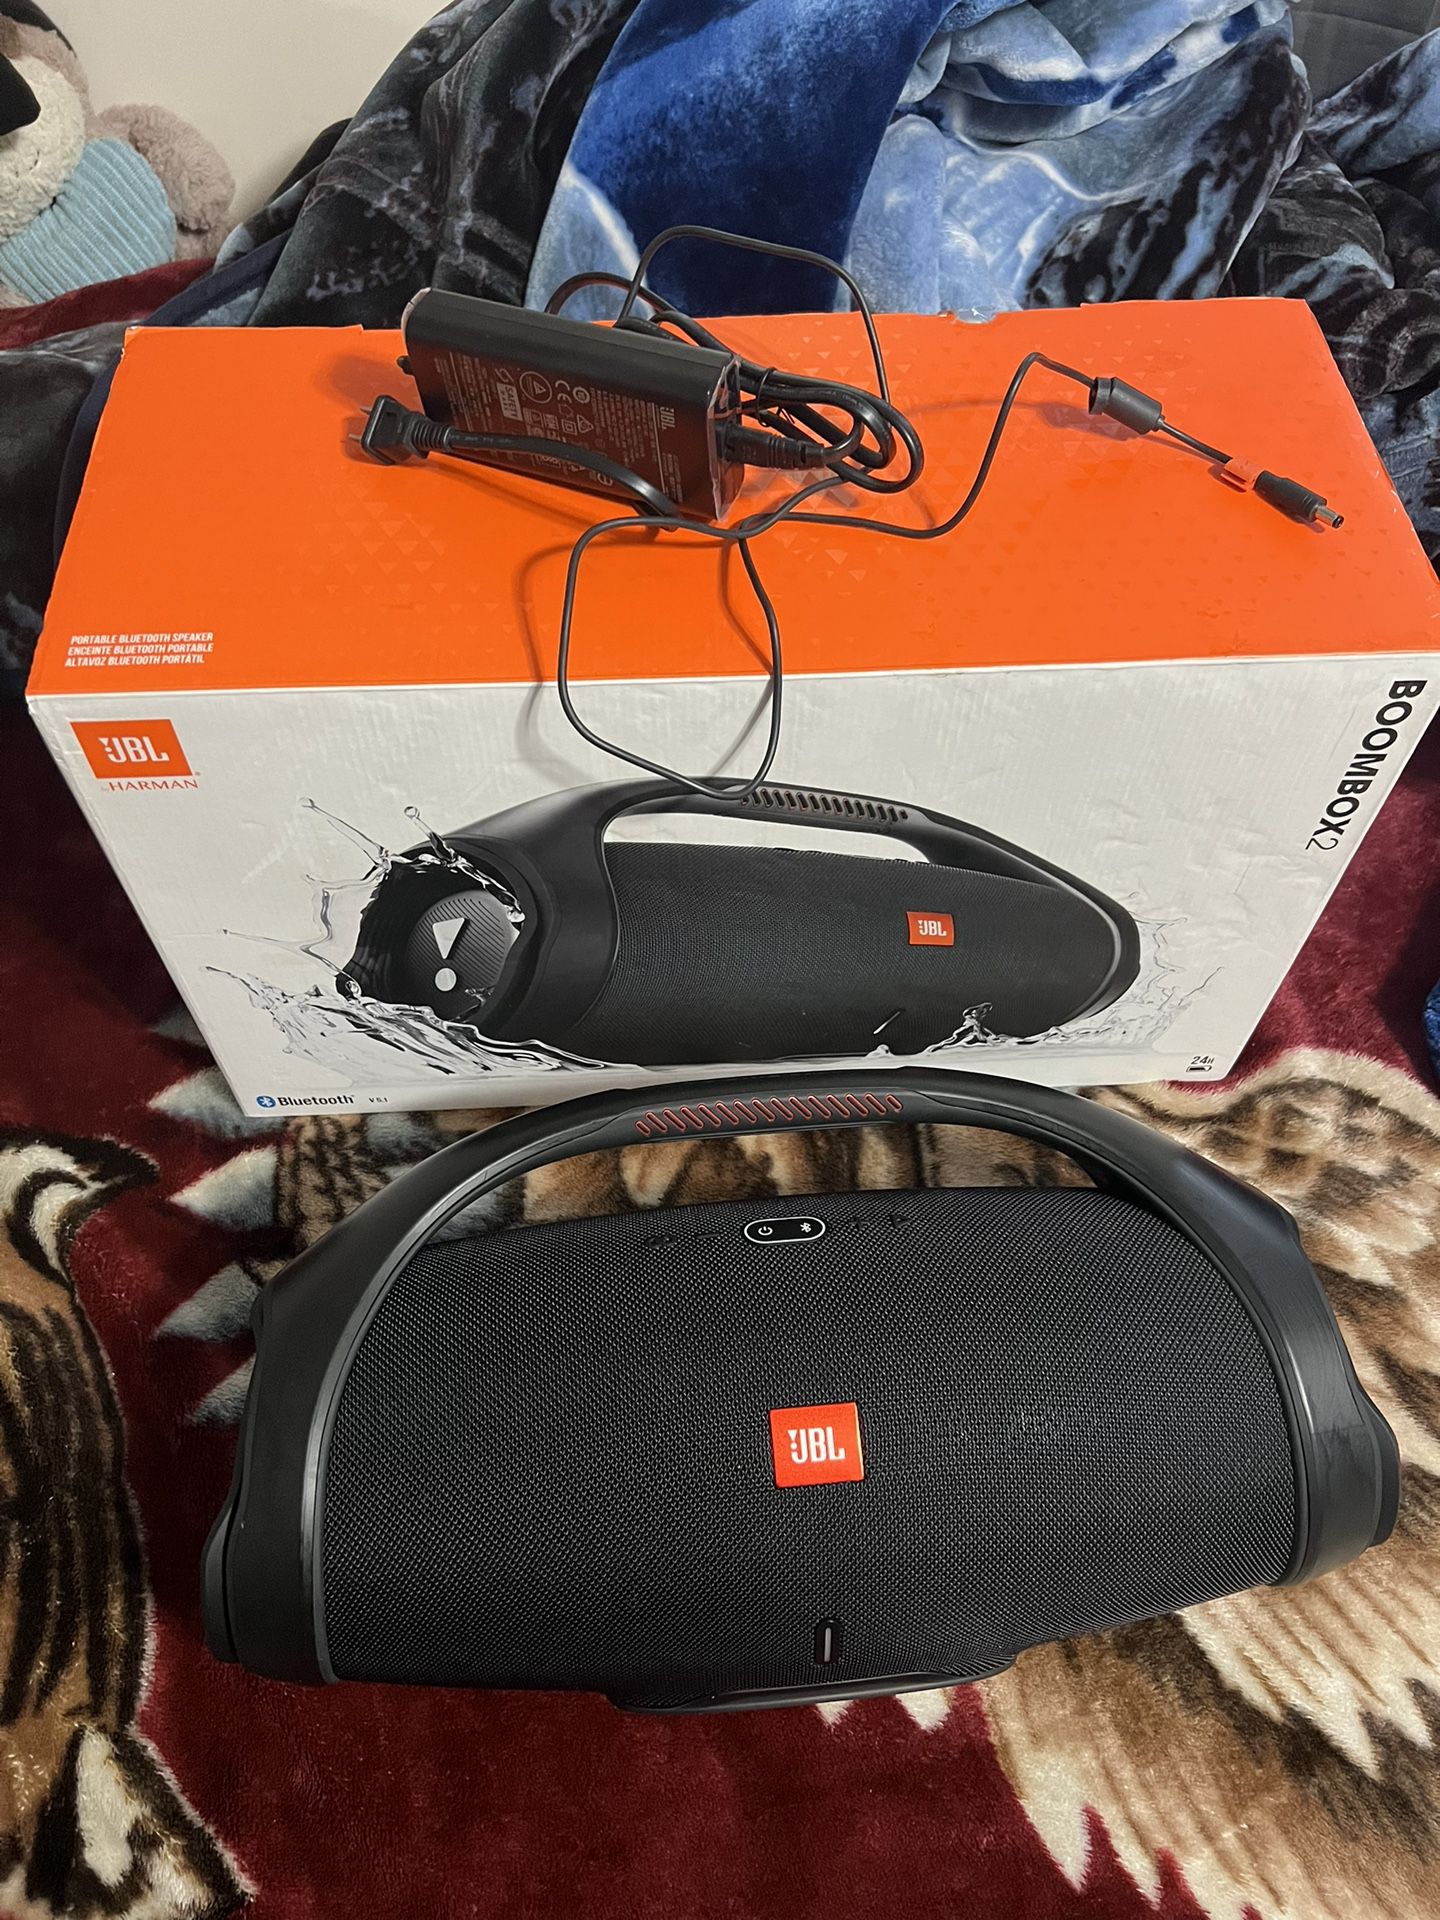 balkon chant Enig med Jbl boombox 2 for Sale in East Meadow, NY - OfferUp